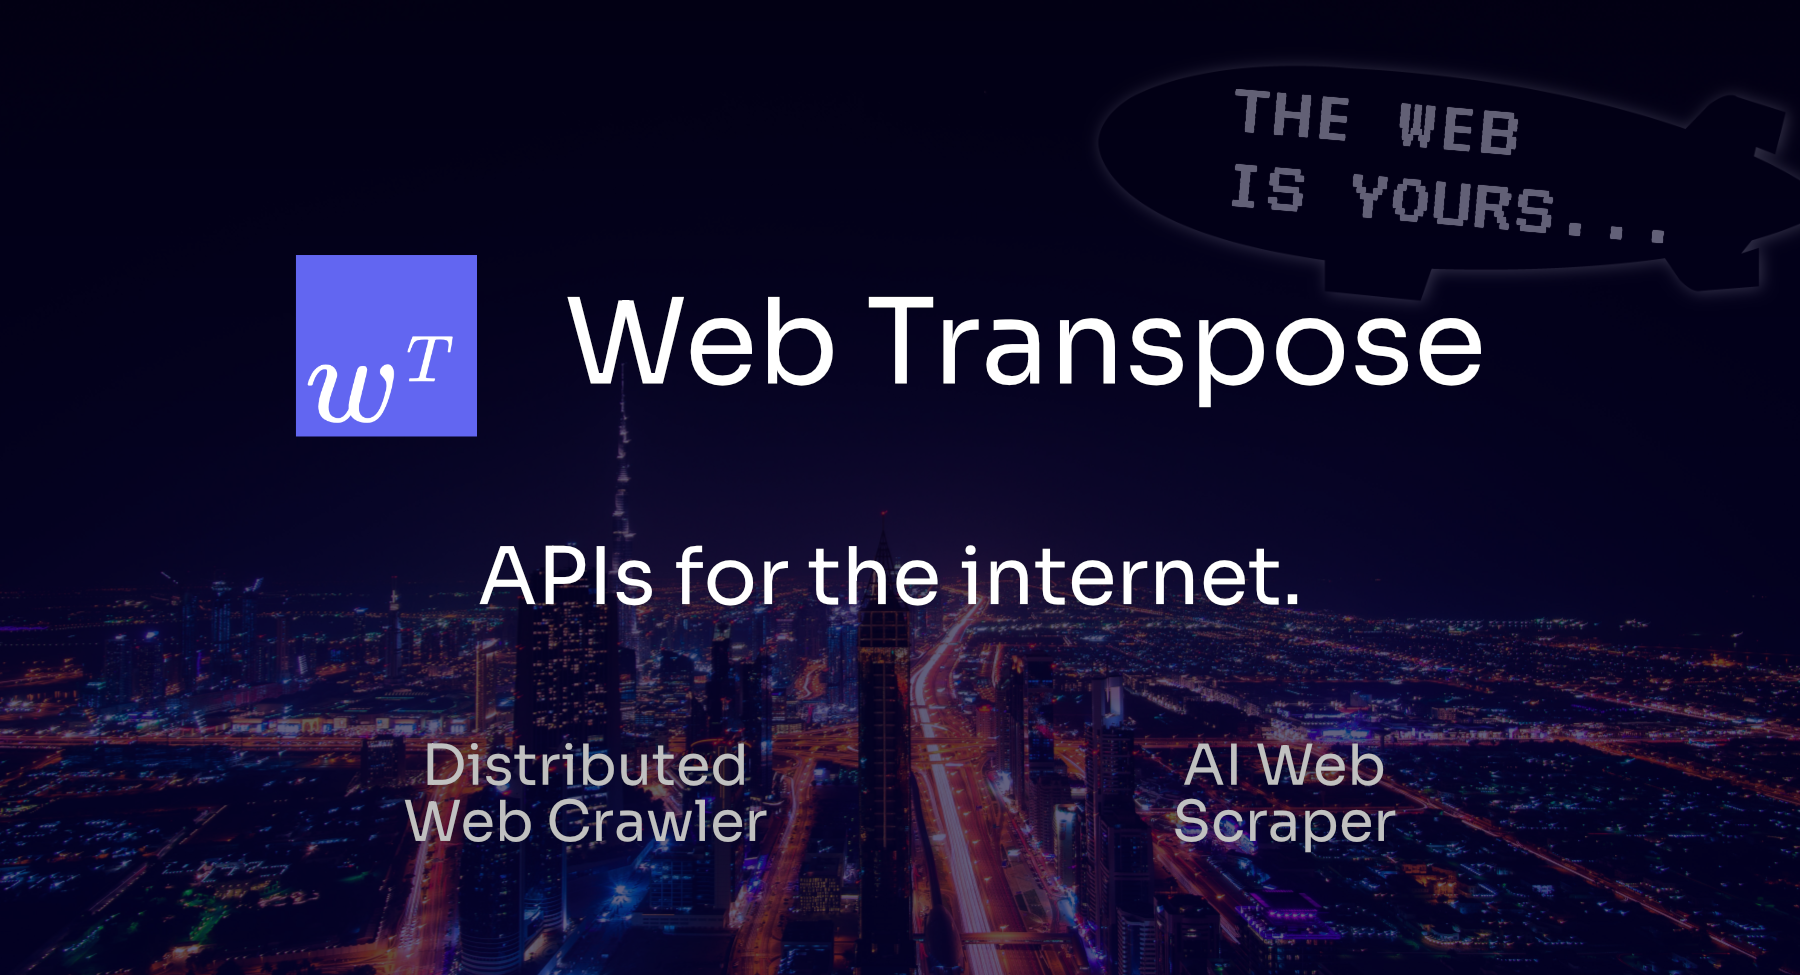 Web Transpose. Simple APIs to get data from the internet.